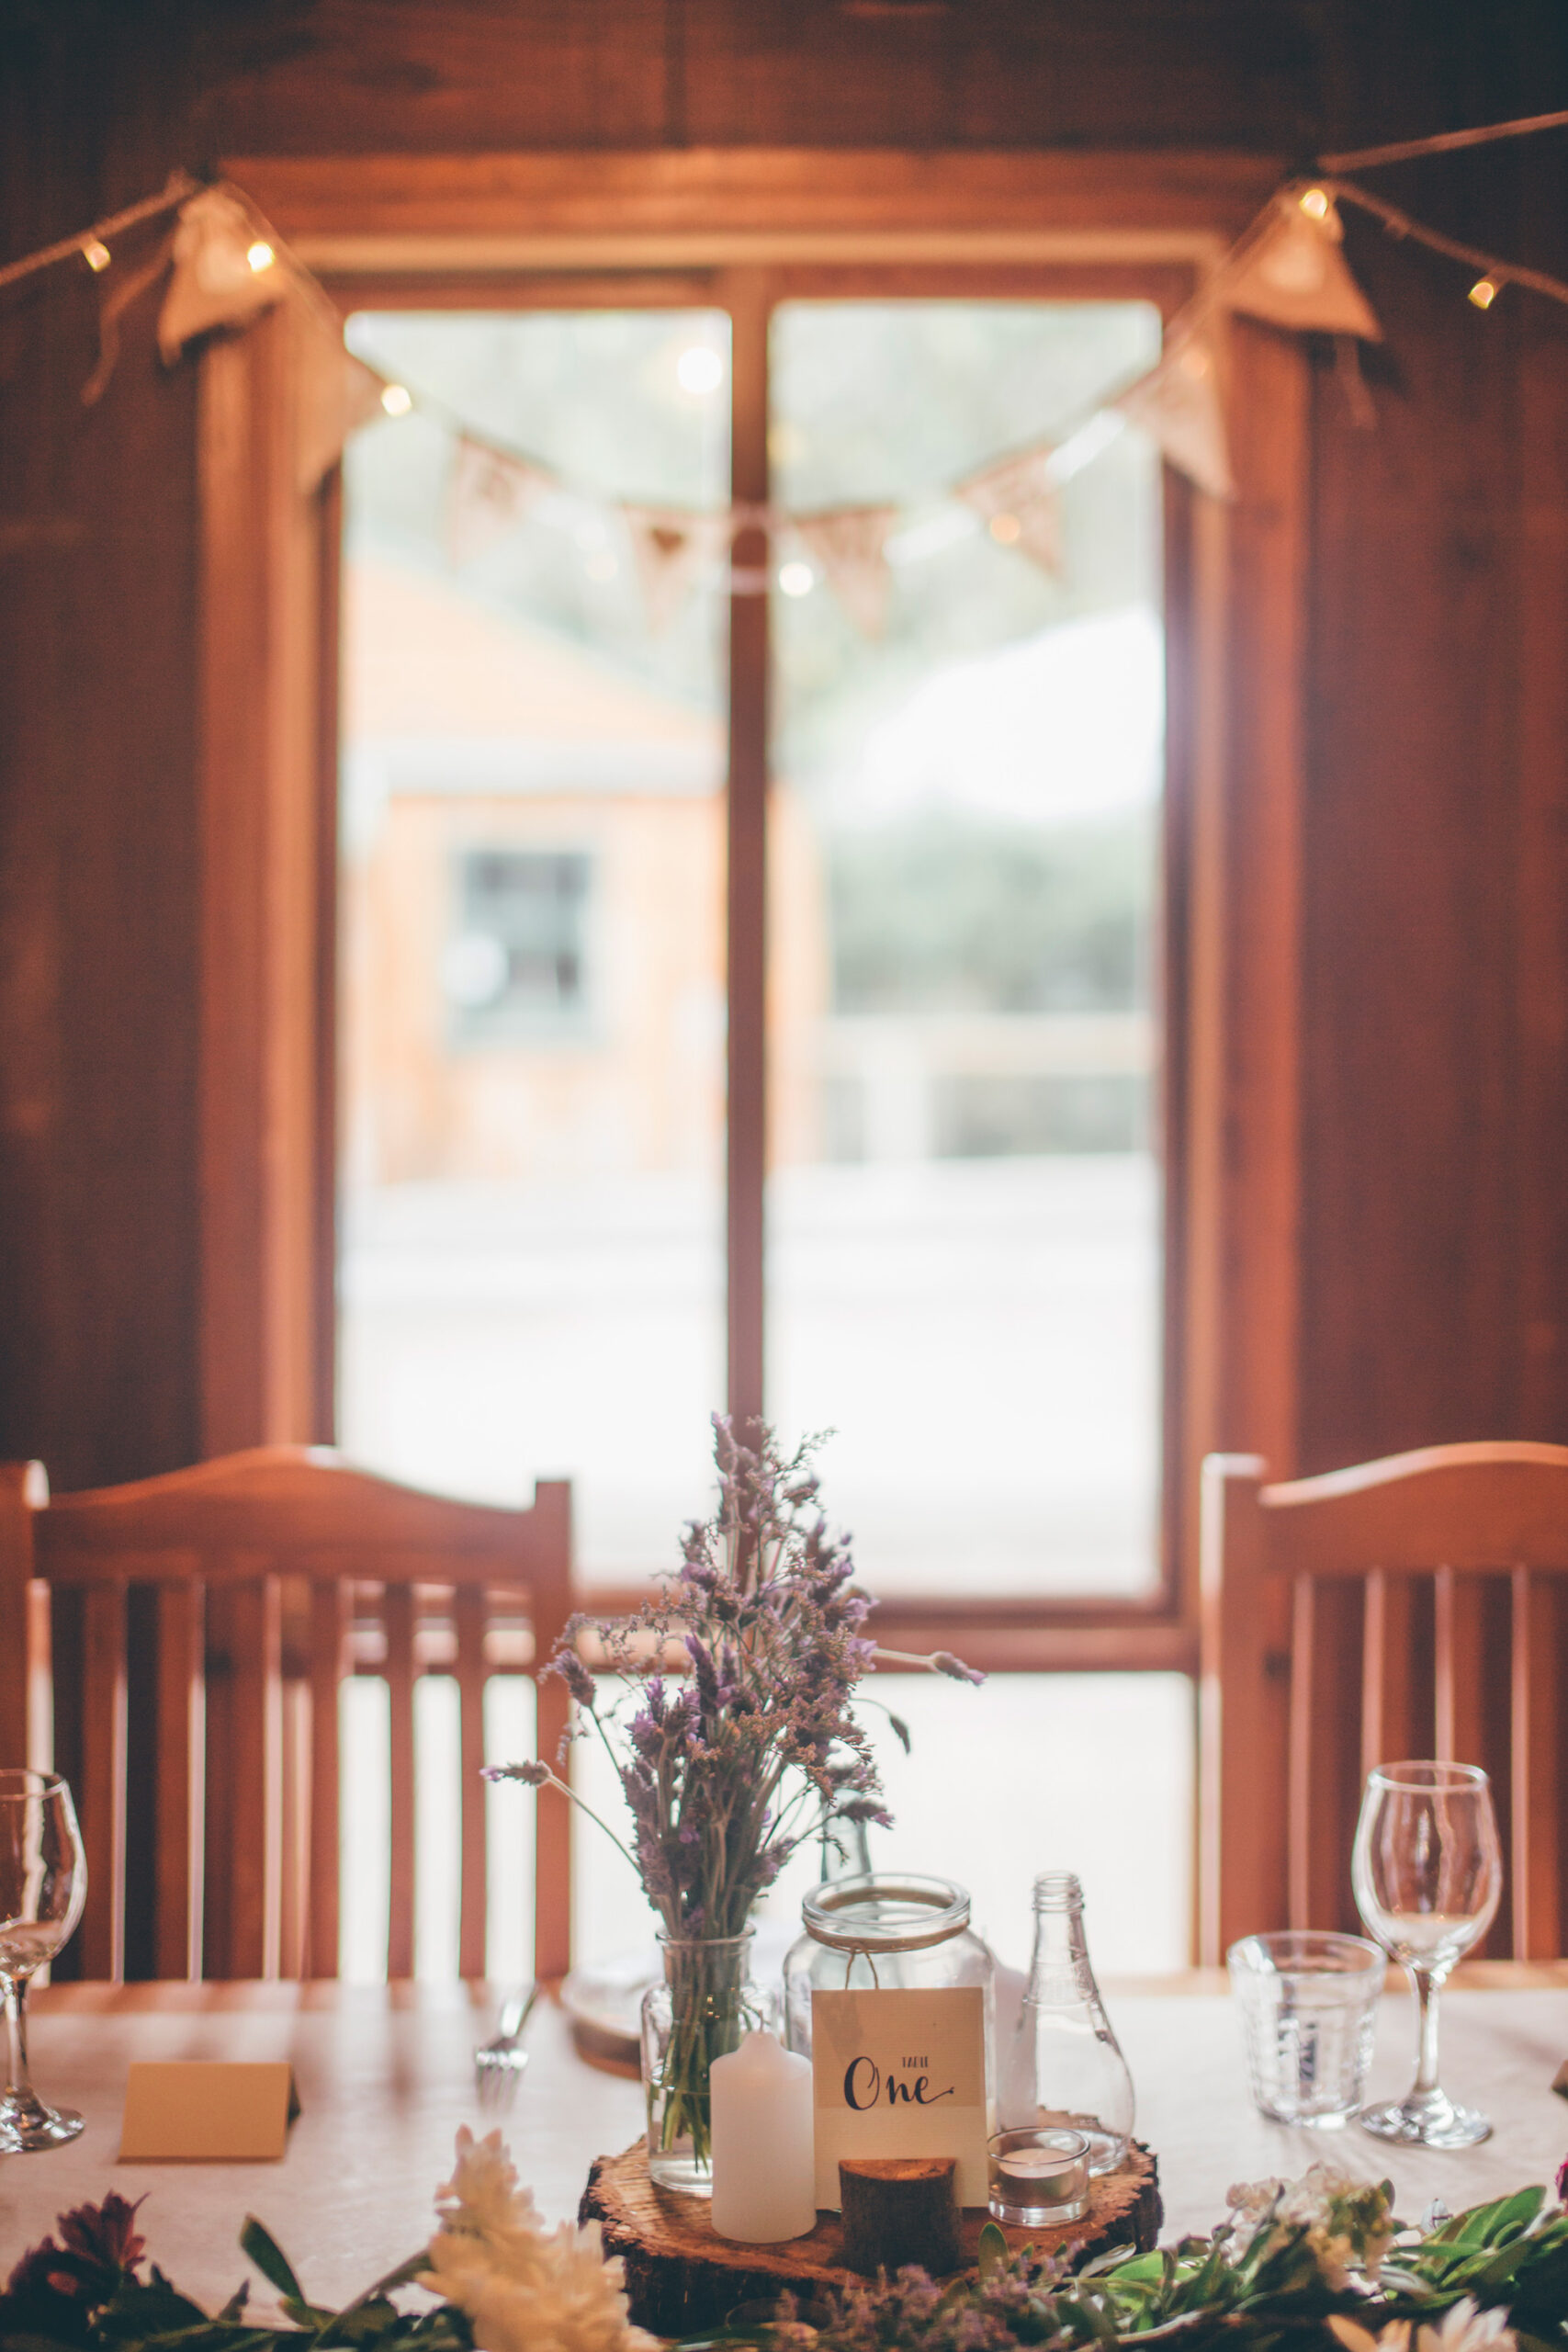 Ally_Clint_Country-Rustic-Wedding_024